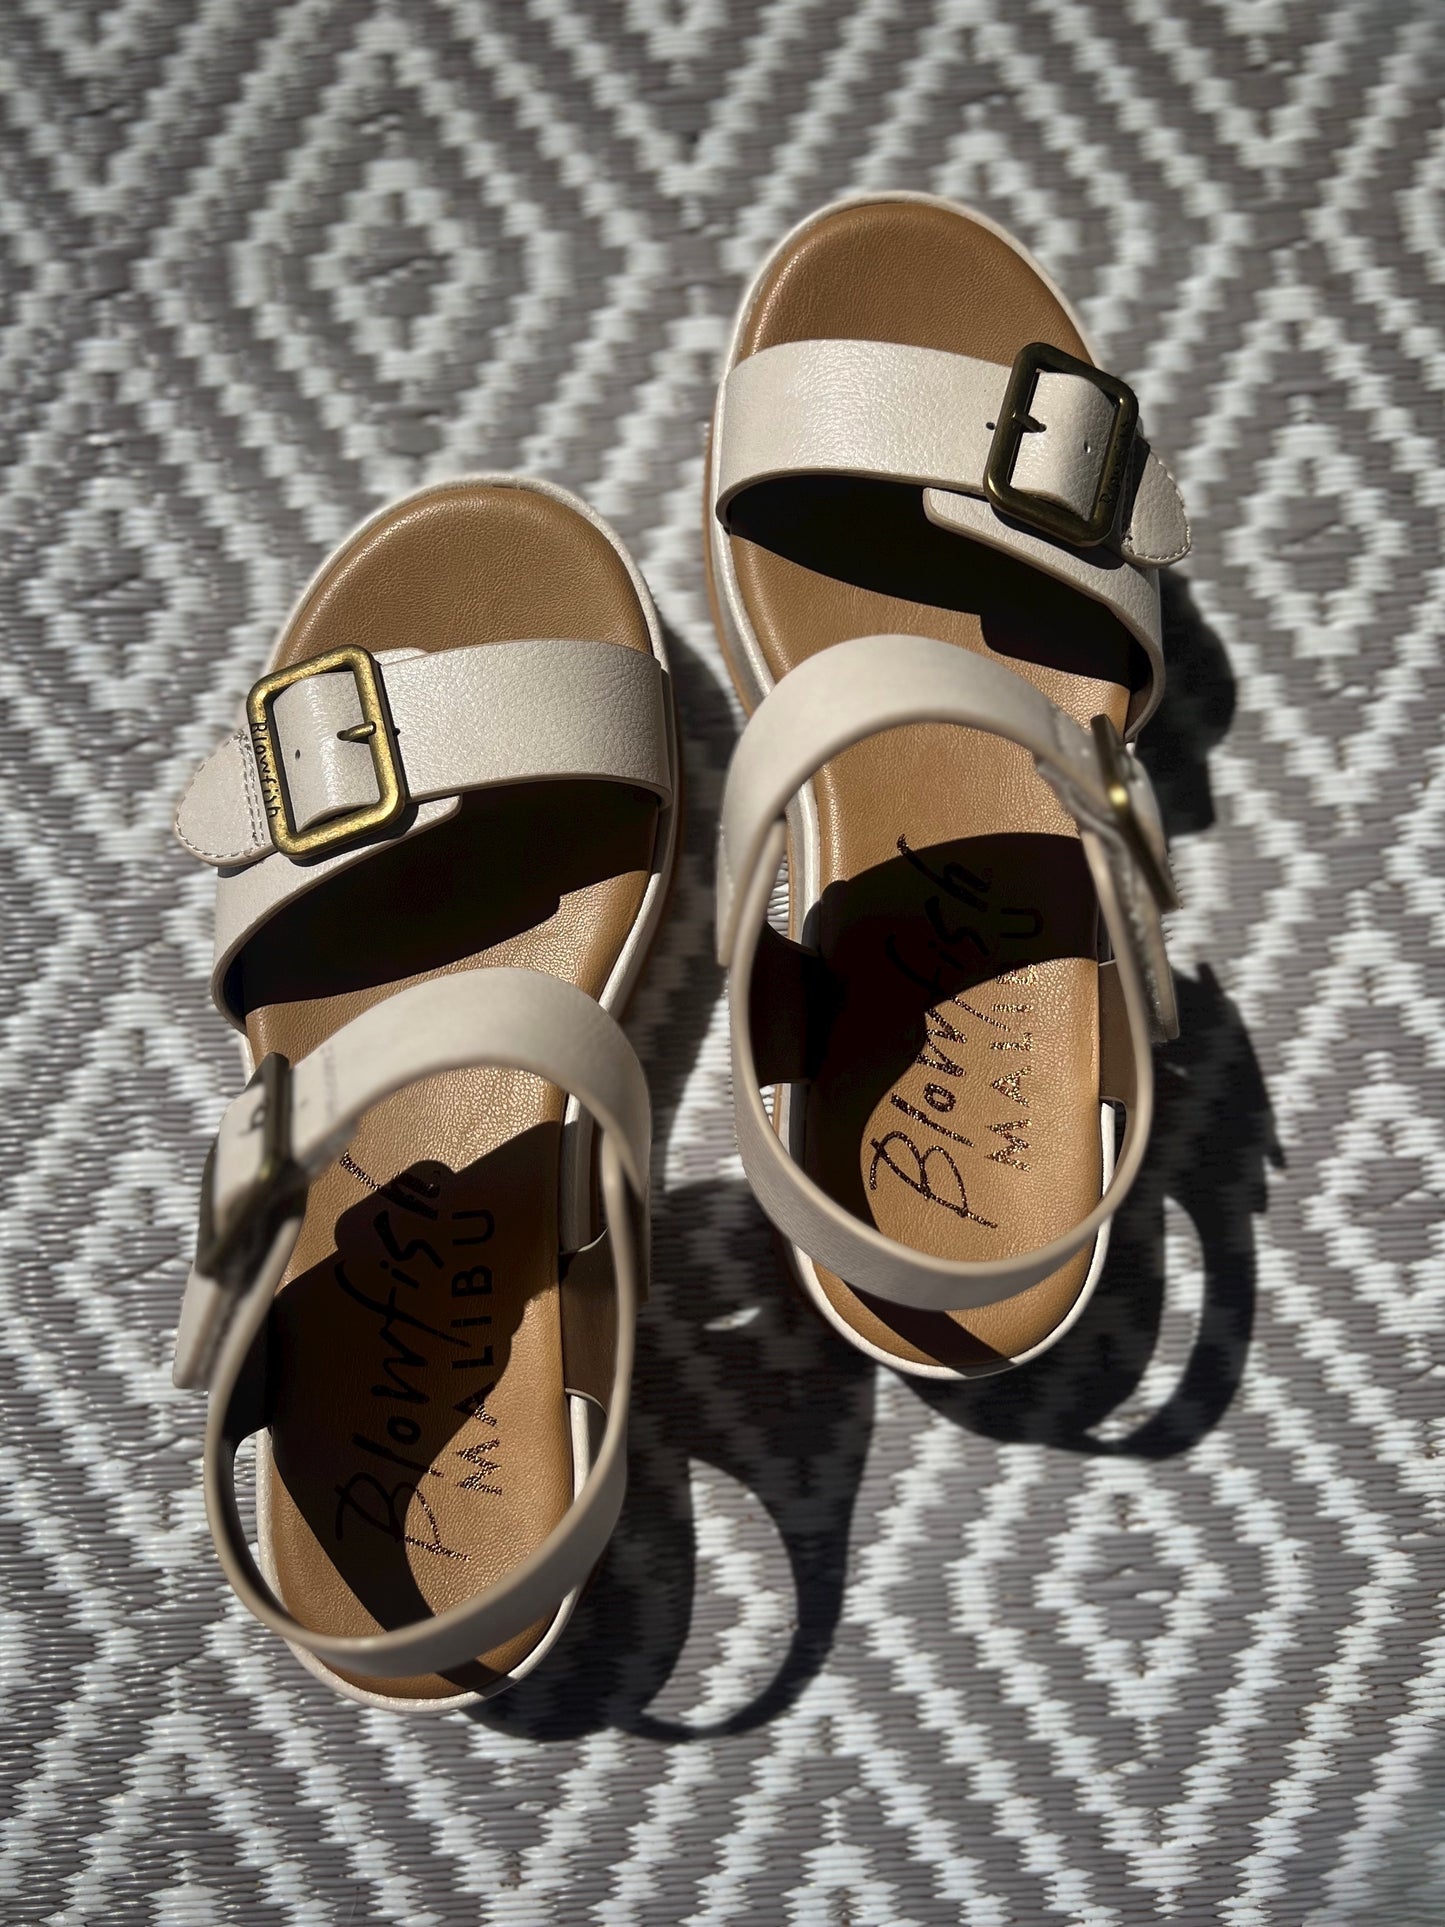 Bone Blowfish Sandals- Strapped for Summer